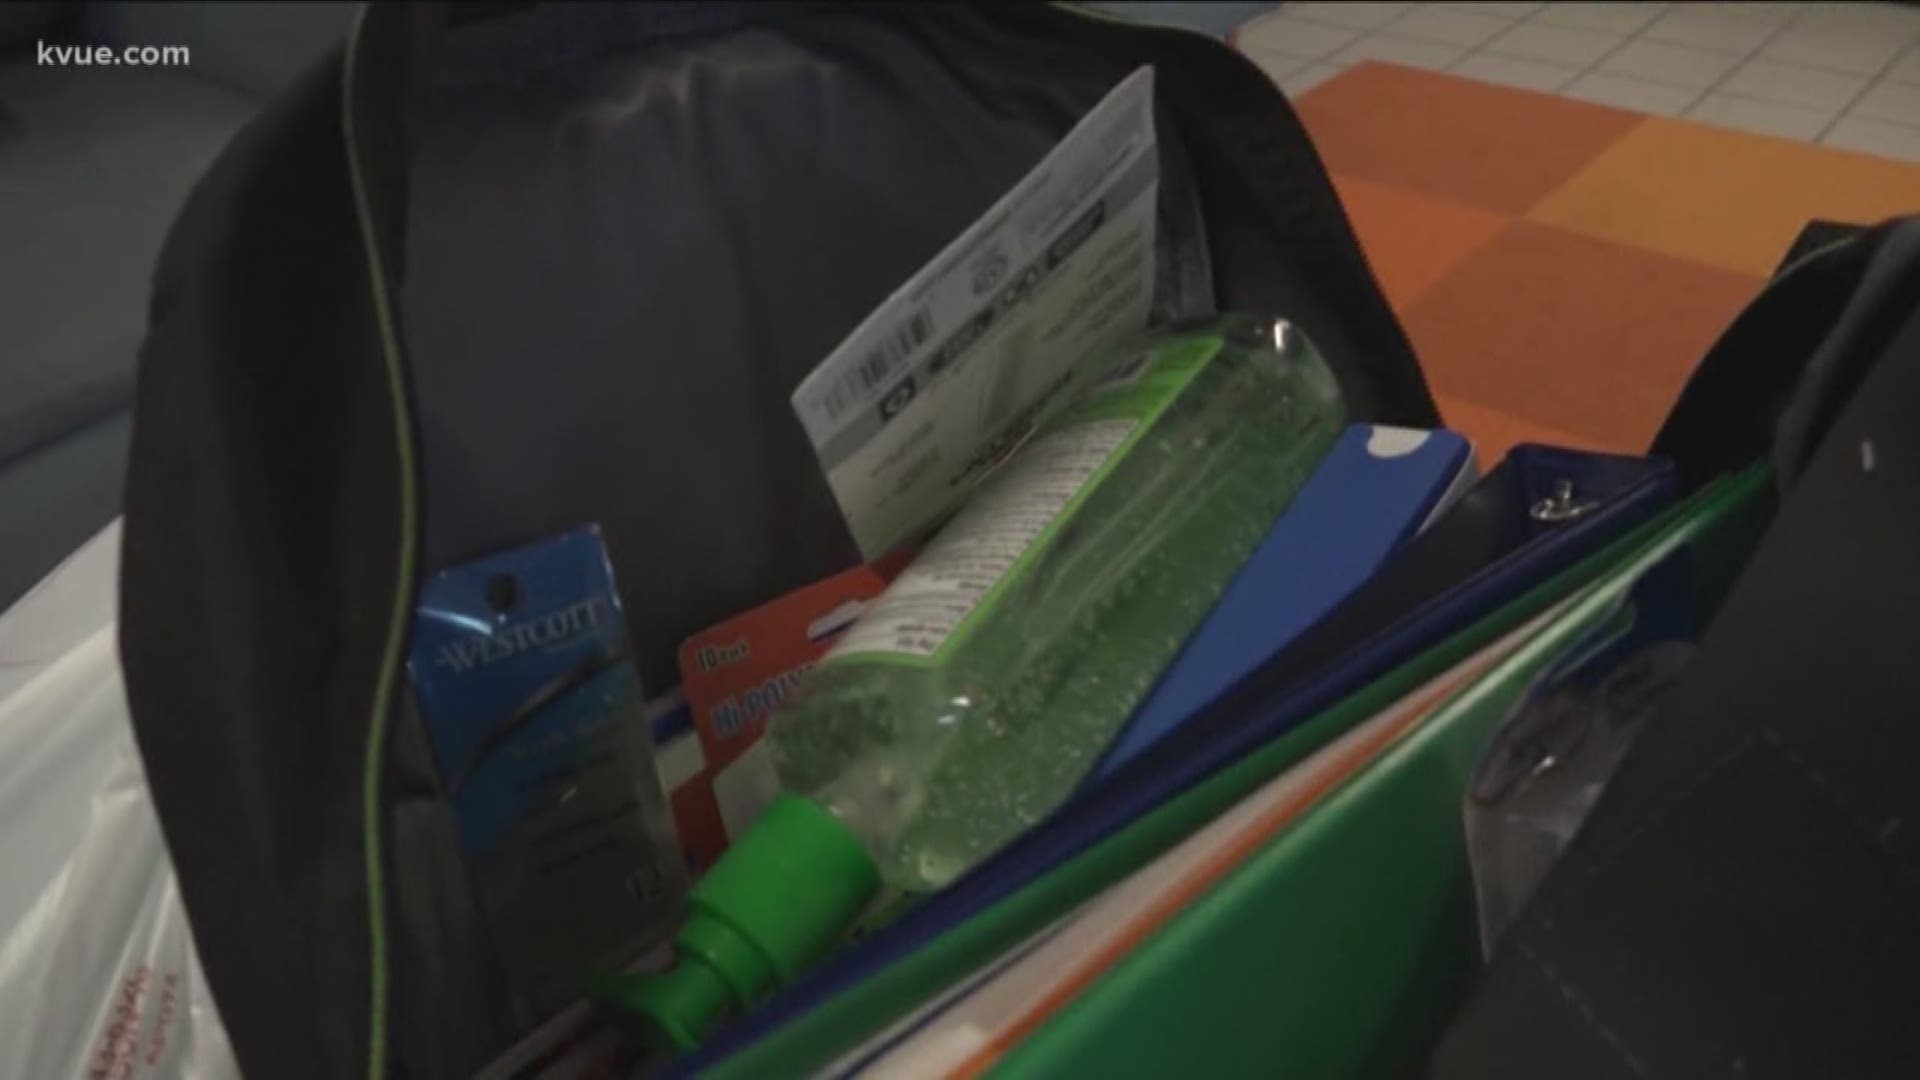 KVUE's Mari Salazar spoke with a family staying at the Salvation Army who relies on donations for school supplies.